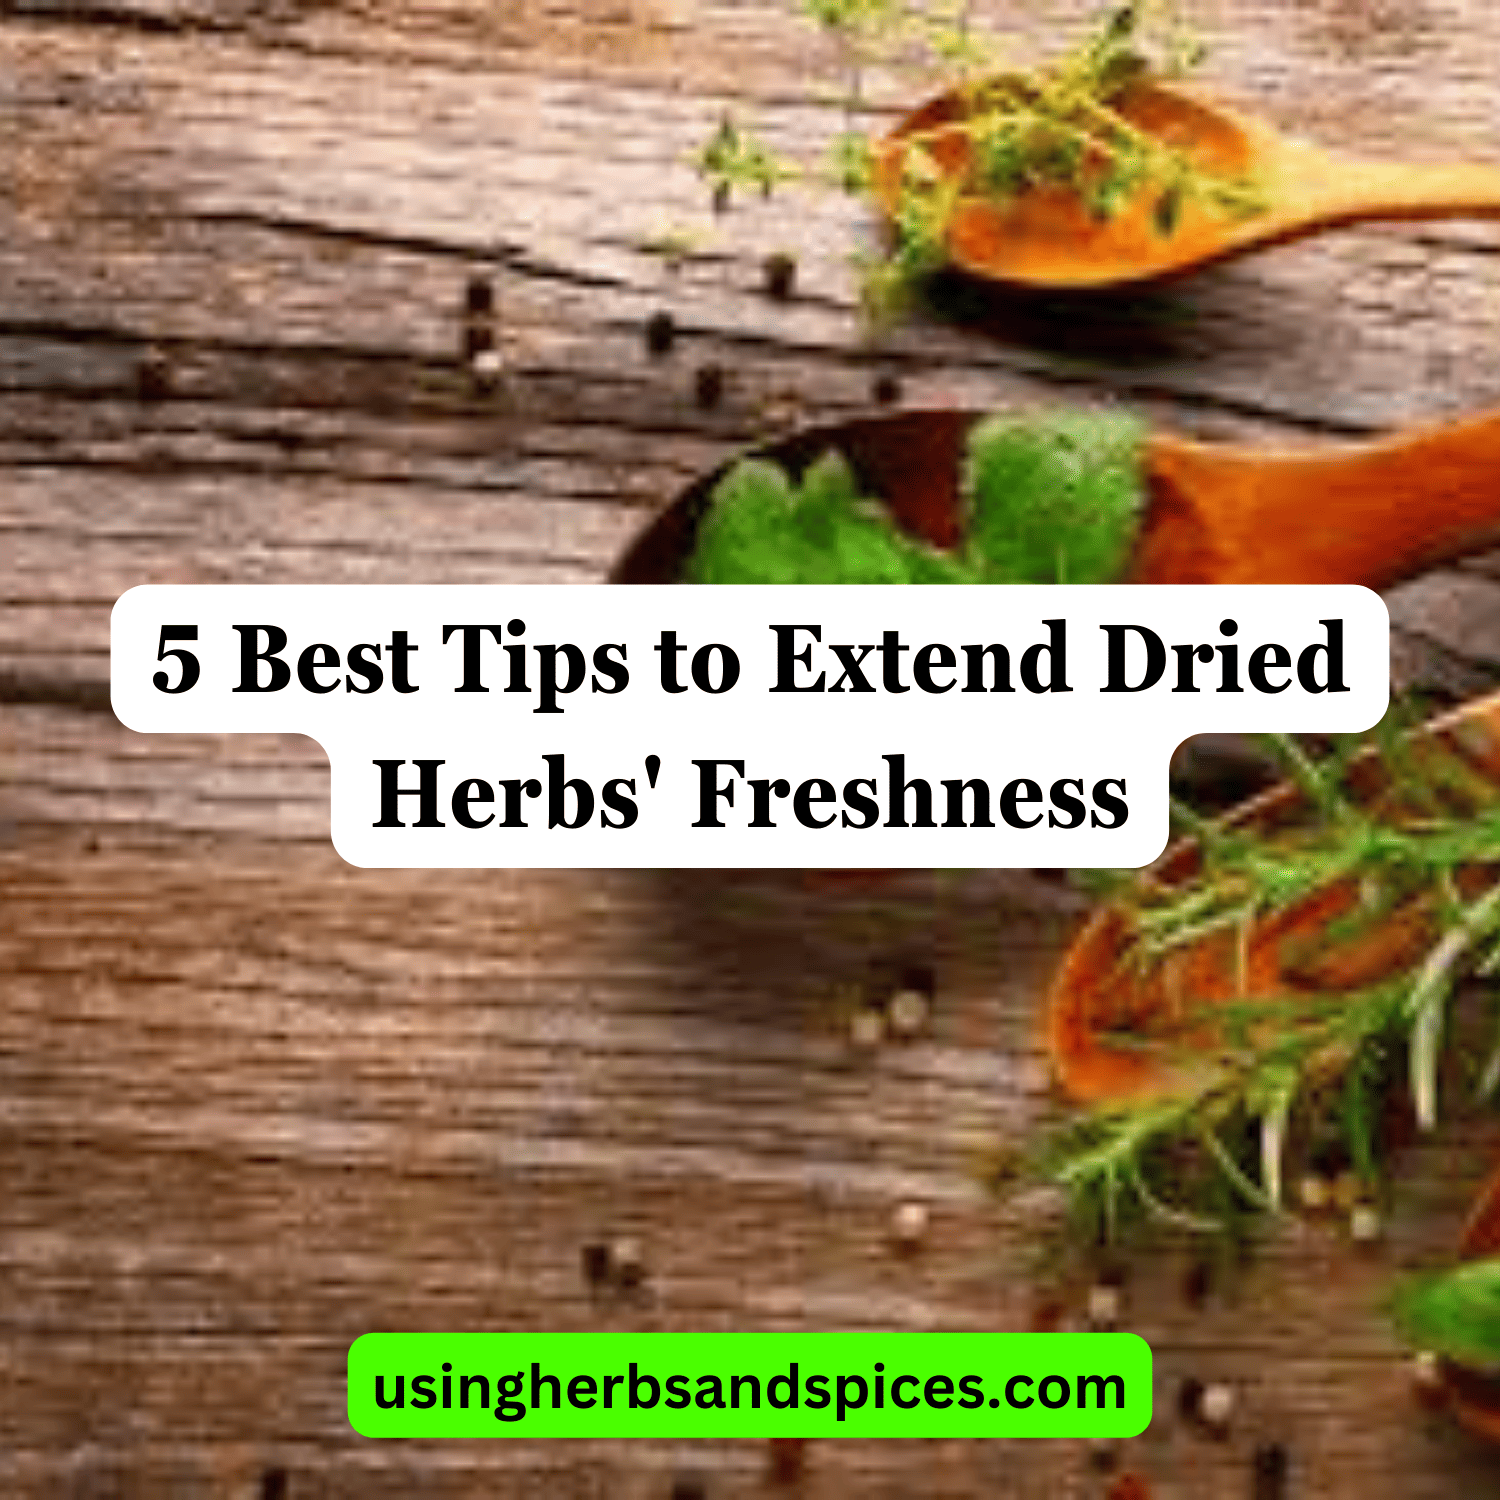 5 Best Tips to Extend Dried Herbs' Freshness